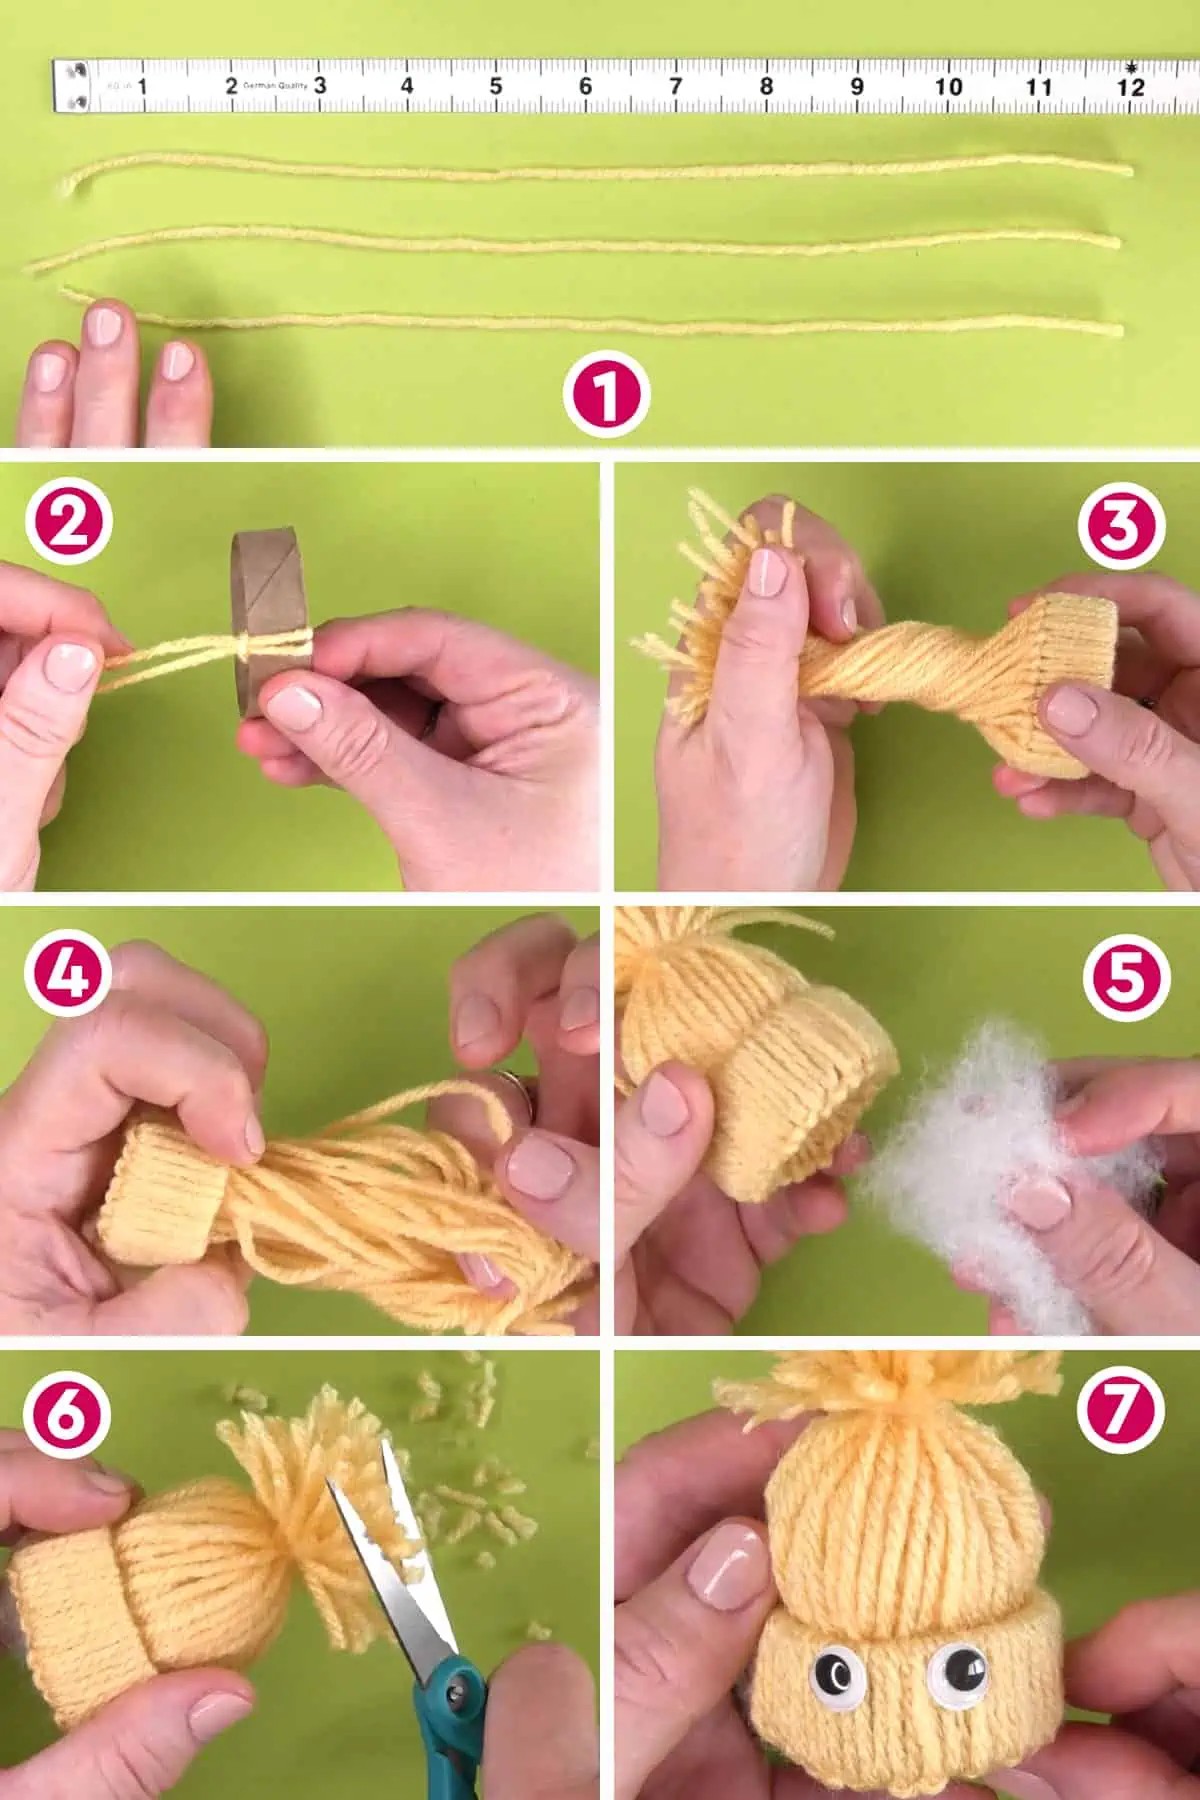 Seven steps to craft a yarn hat to make a creme egg cover chick.